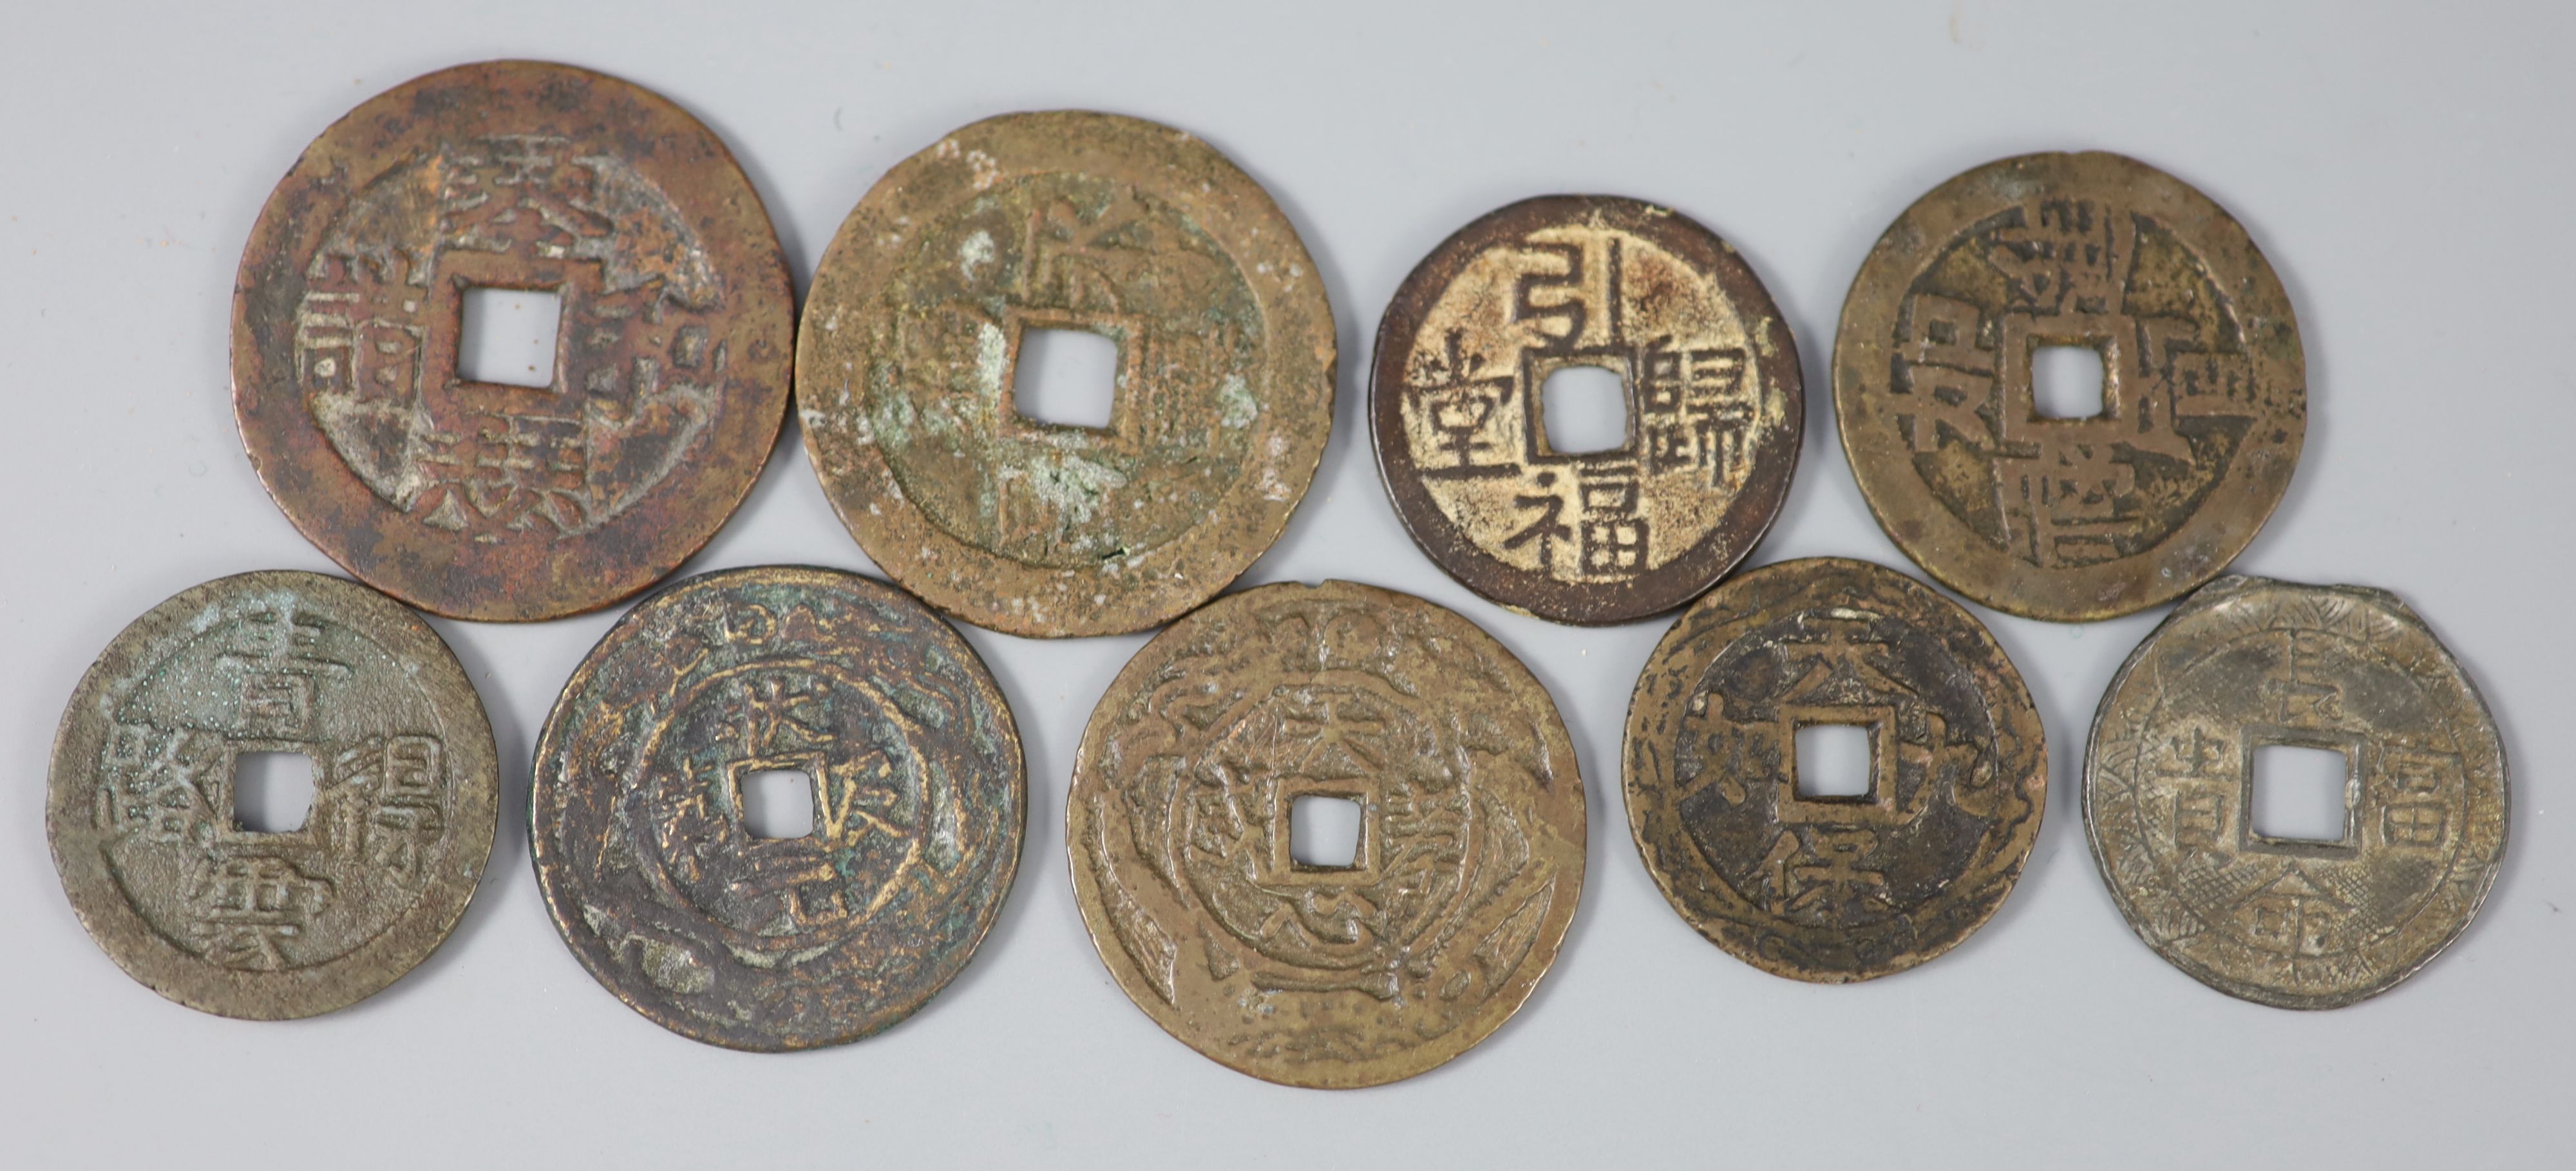 China, 9 bronze or copper charms or amulets, Qing dynasty,